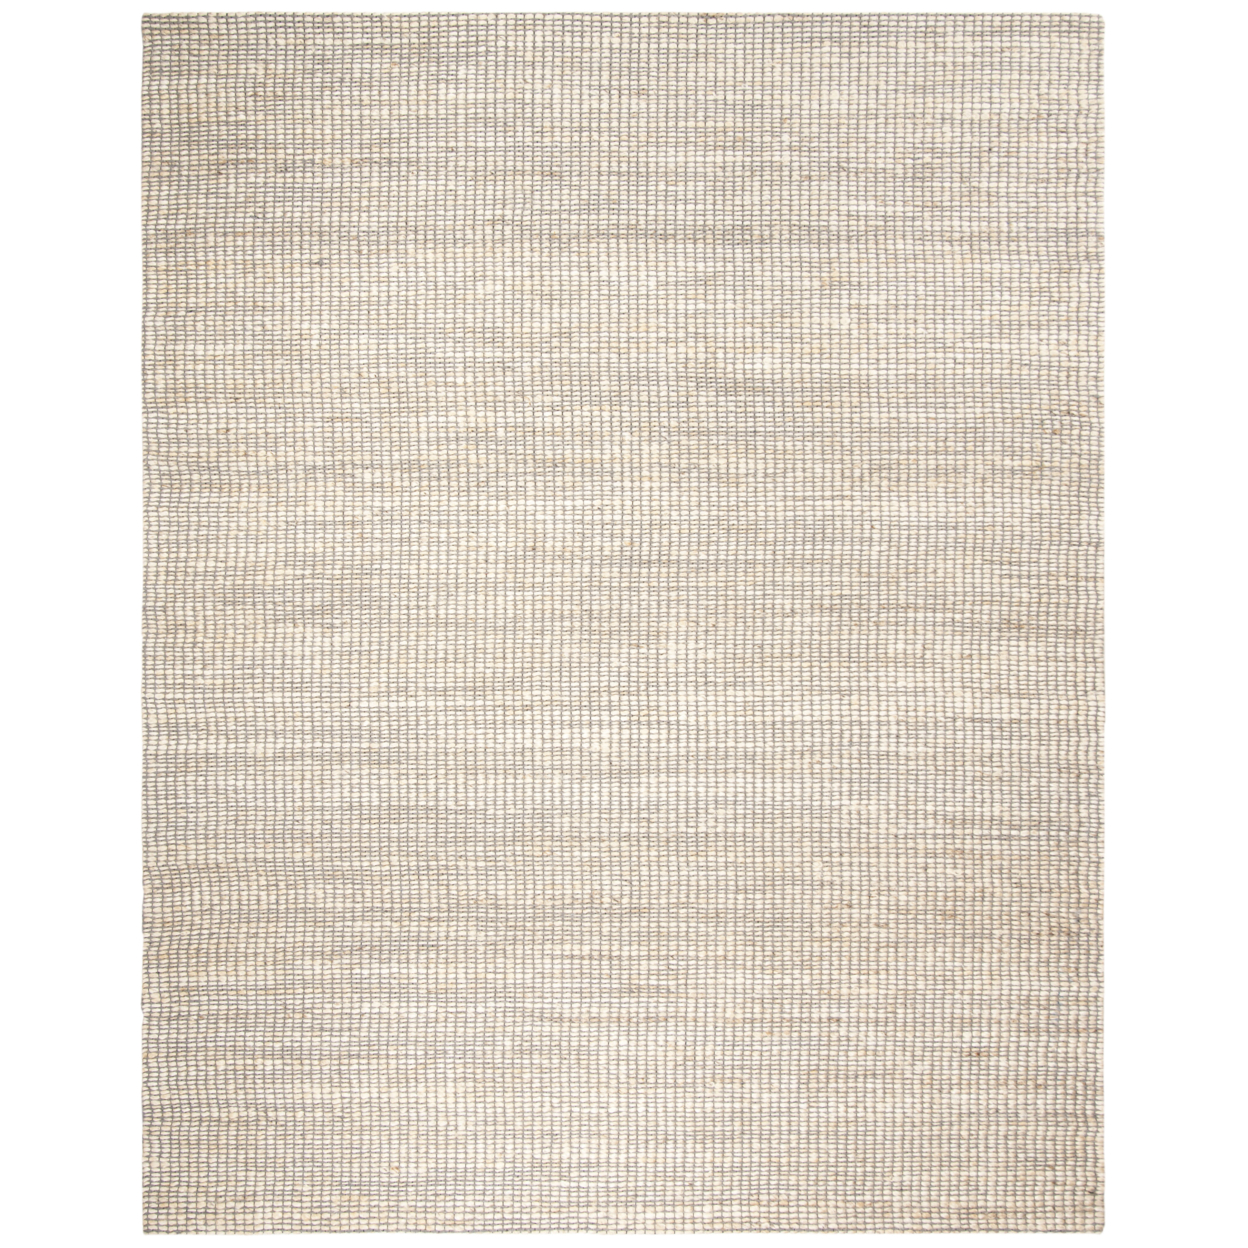 SAFAVIEH Marbella Collection MRB303A Braided Ivory Rug - 8' Square